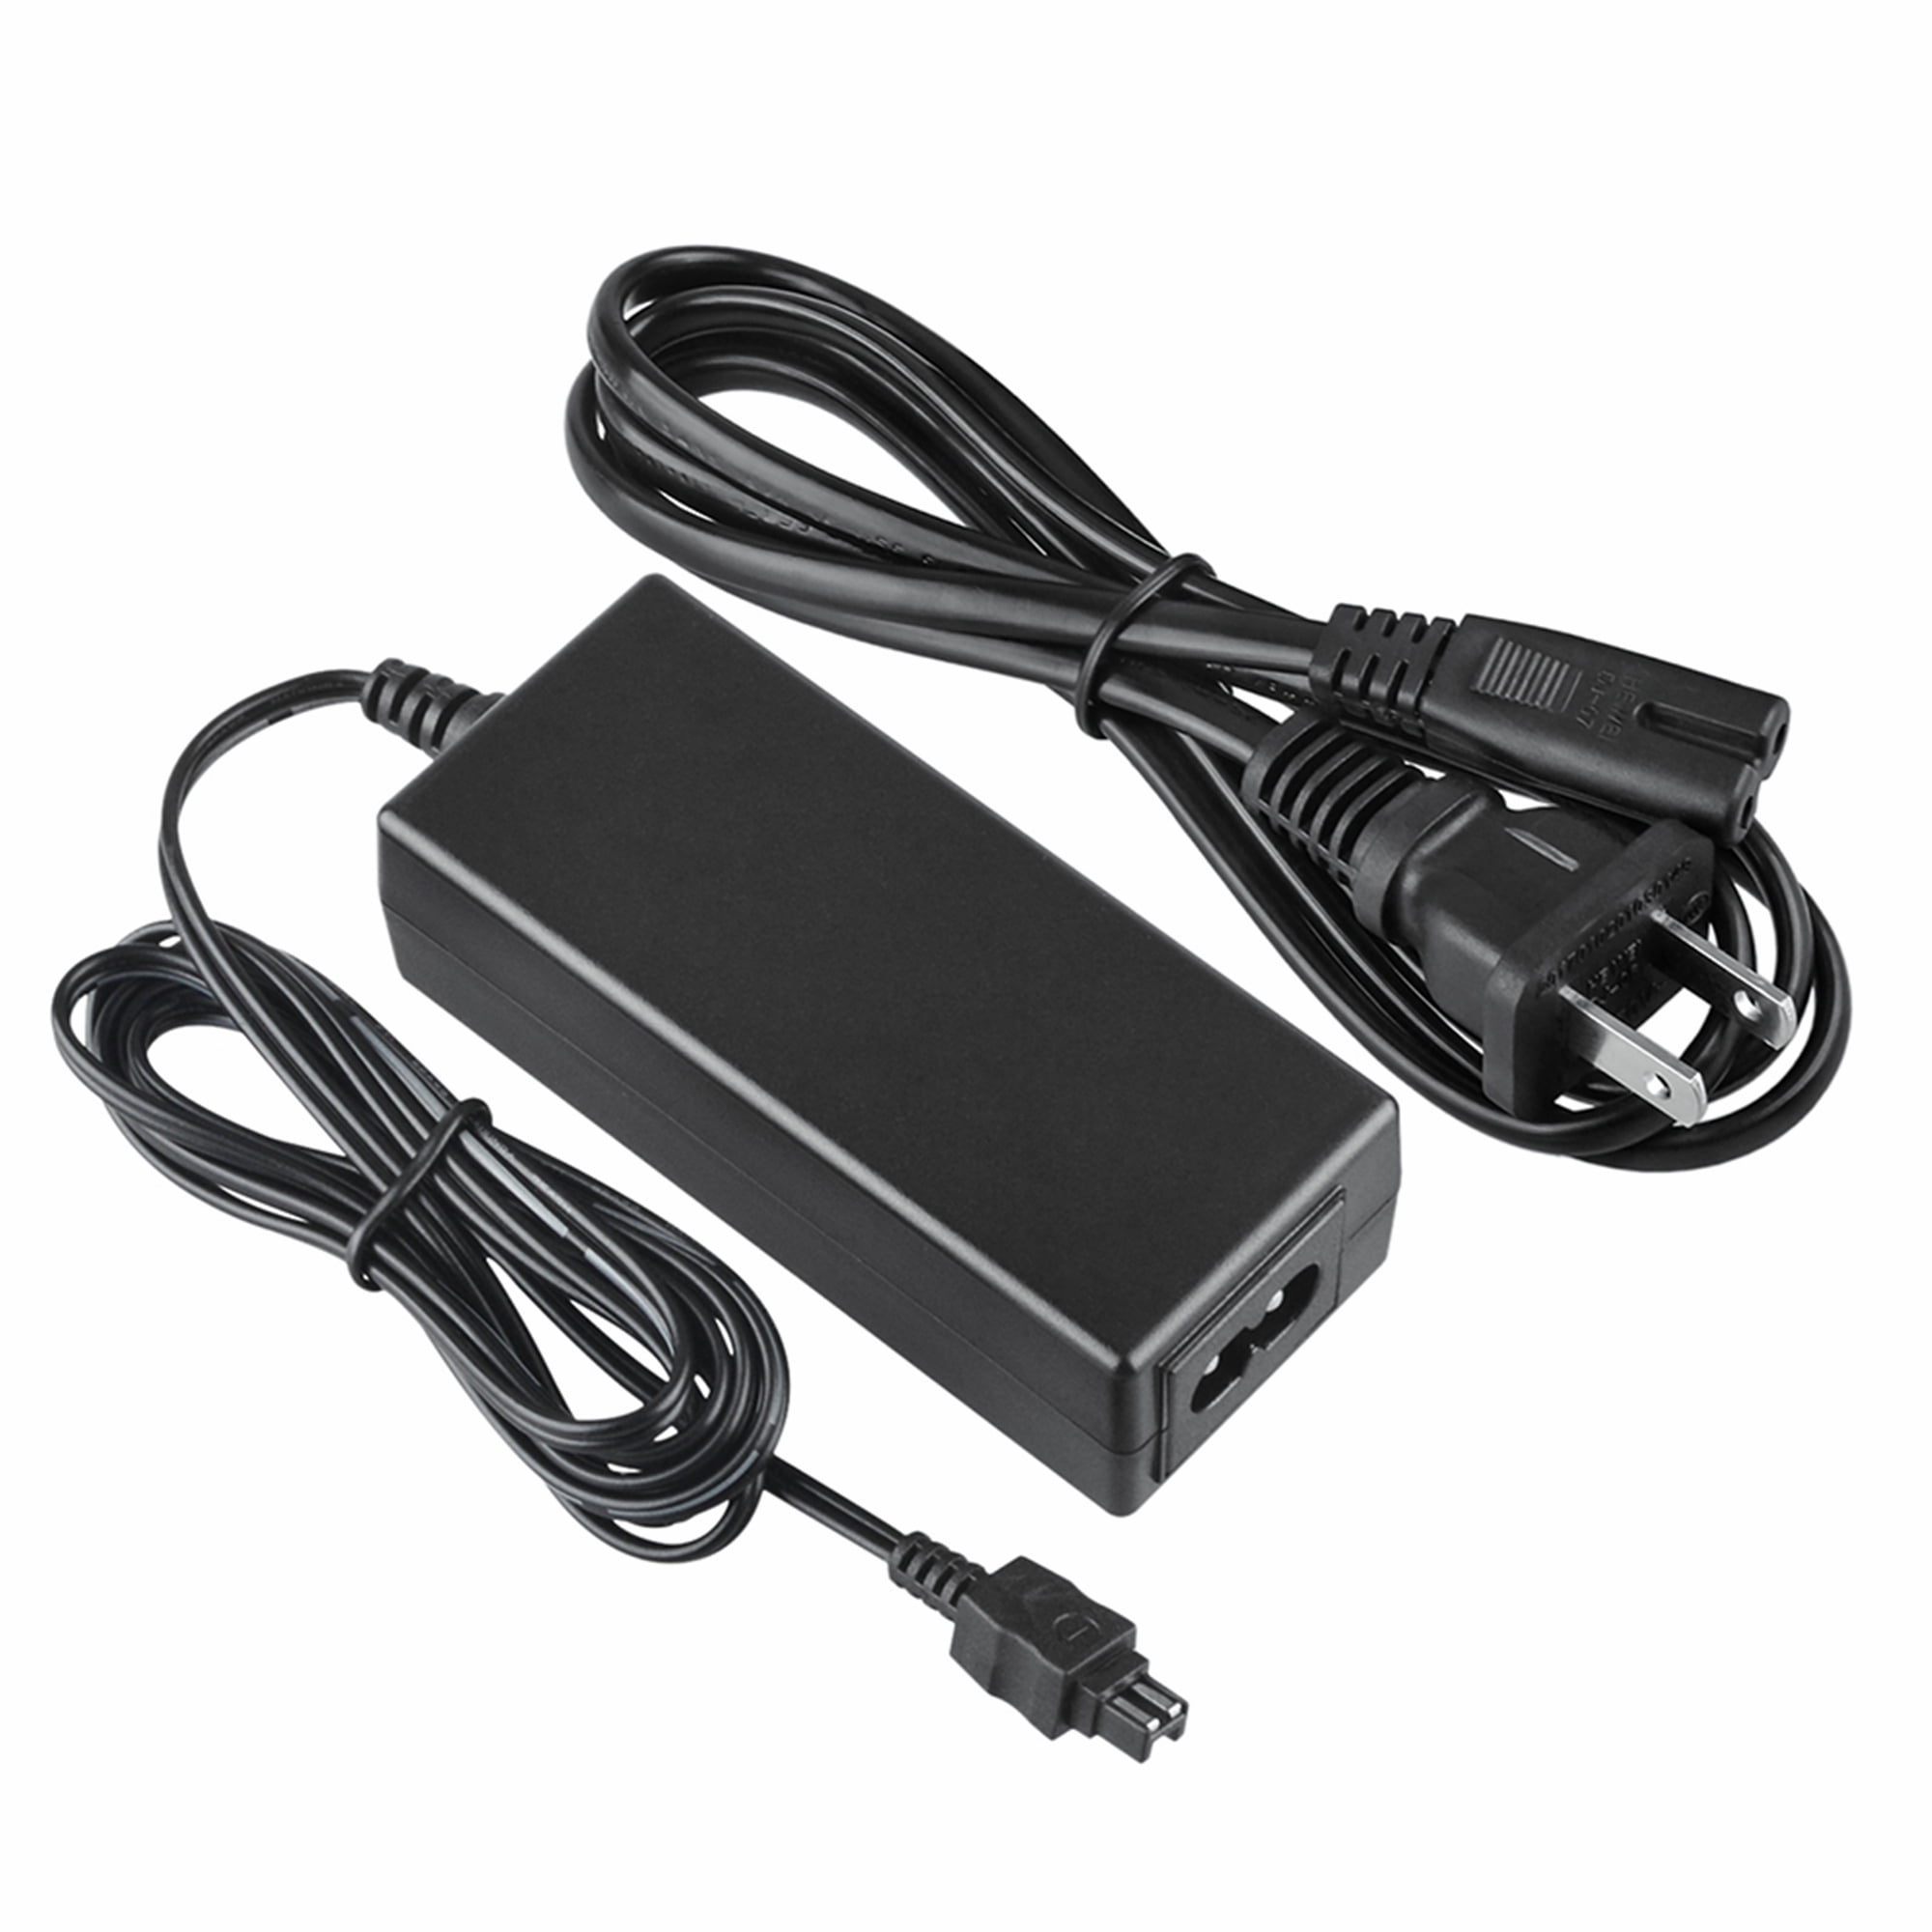 AC/DC Wall Battery Power Charger Adapter Compatible with Sony Camcorder DCR-SR100 E DCR-SR20 